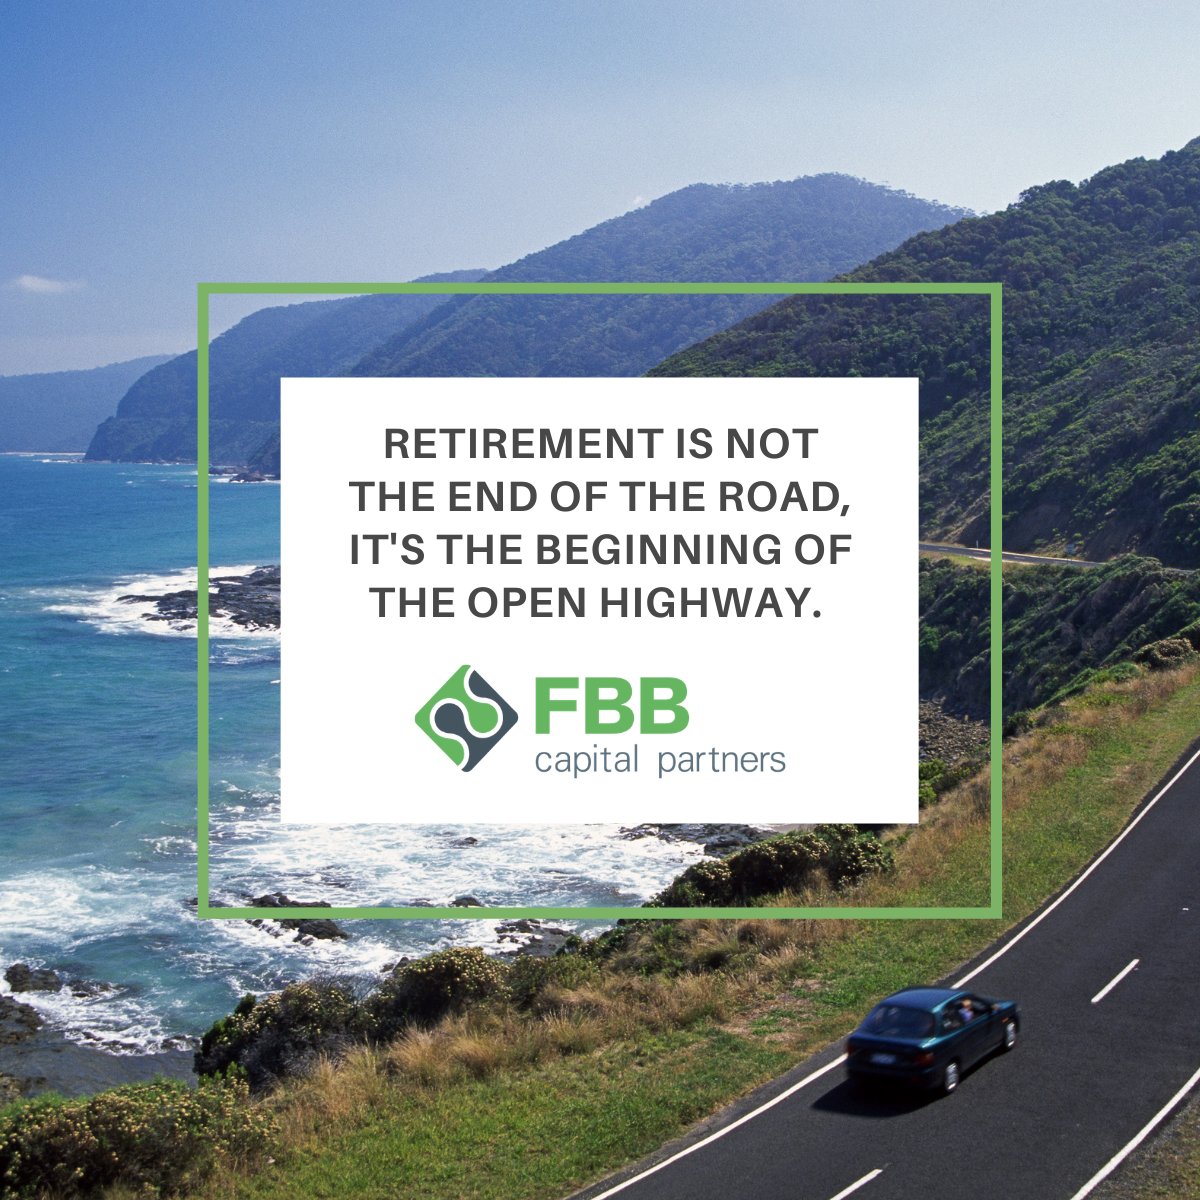 Fbb Capital Partners One Of The Best Things About Retirement Is That You Can Choose How To Spend Your Time Are You Yearning For The Open Road Or Prefer To